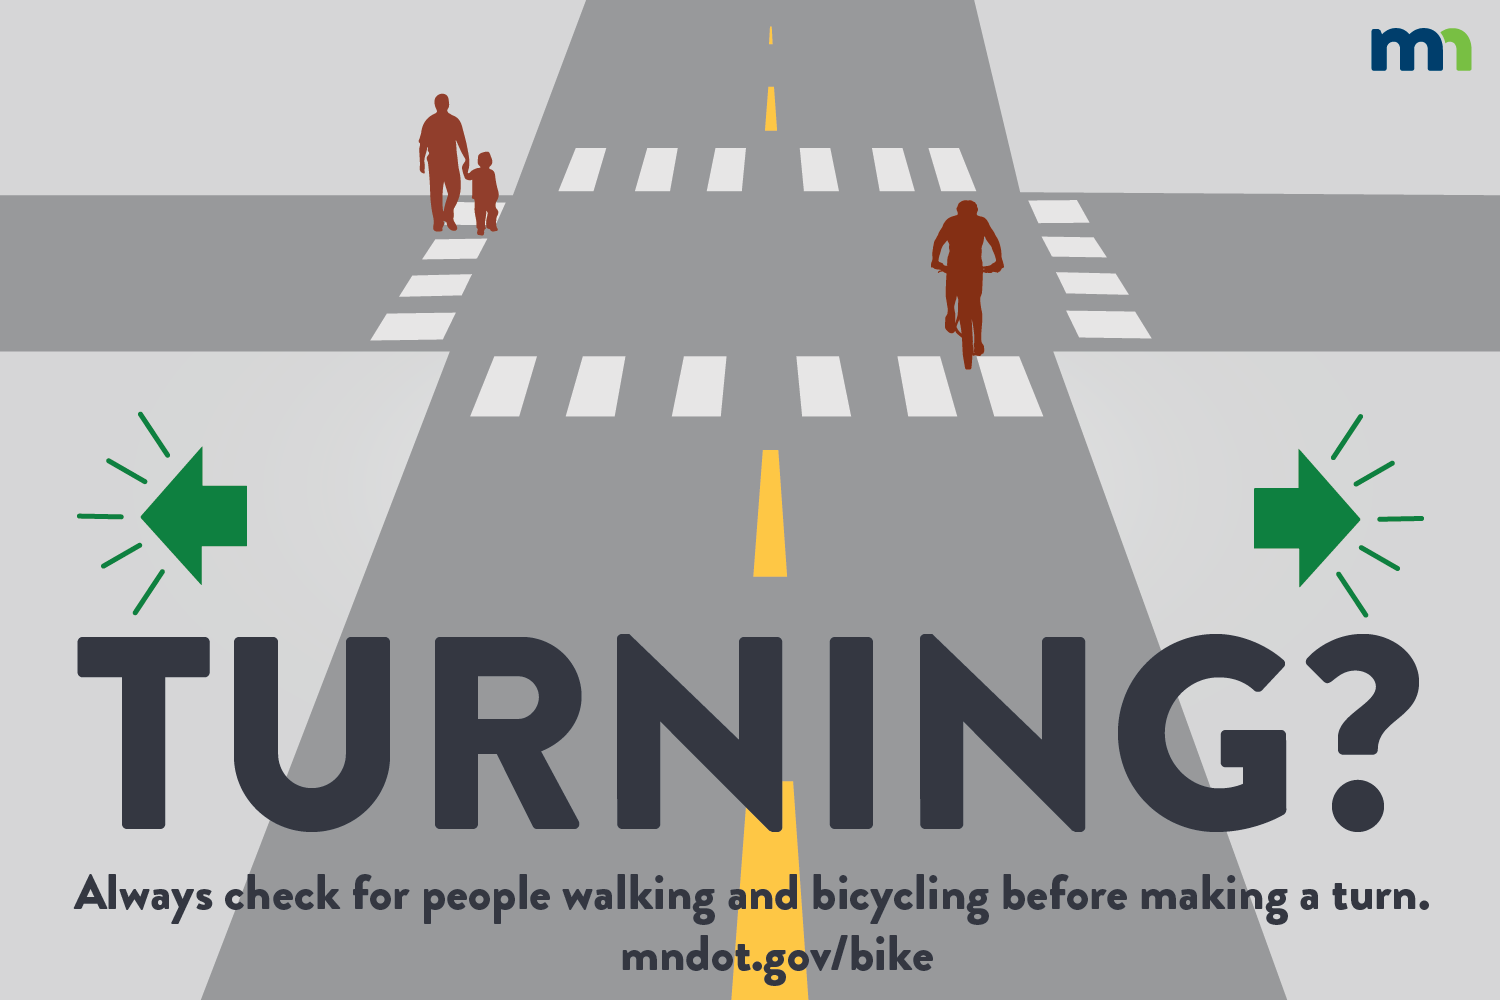 Turning?: Always check for people walking and bicycling before making a turn.